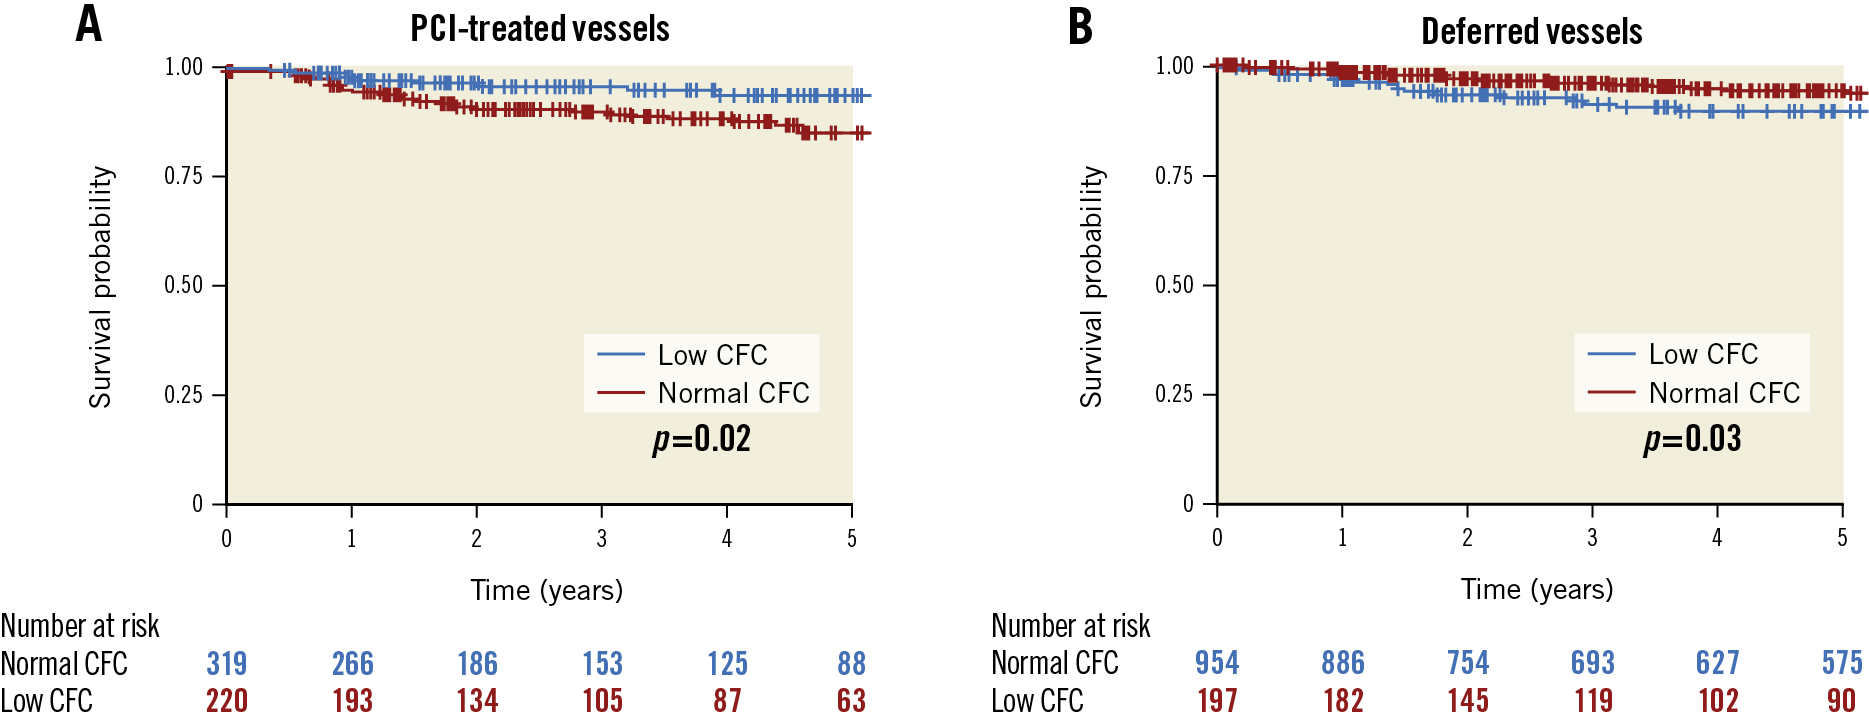 Figure 2. Survival from vessel-related major adverse cardiovascular events (MACE) according to CFC status. Kaplan-Meier curves showing survival from MACE comparing vessels with low CFC (CFR ≤3.2 and 1/hTmn ≤2.8) versus normal CFC. The comparisons are illustrated among PCI-treated vessels (A) and deferred vessels (B). P-values were based on the log-rank test.